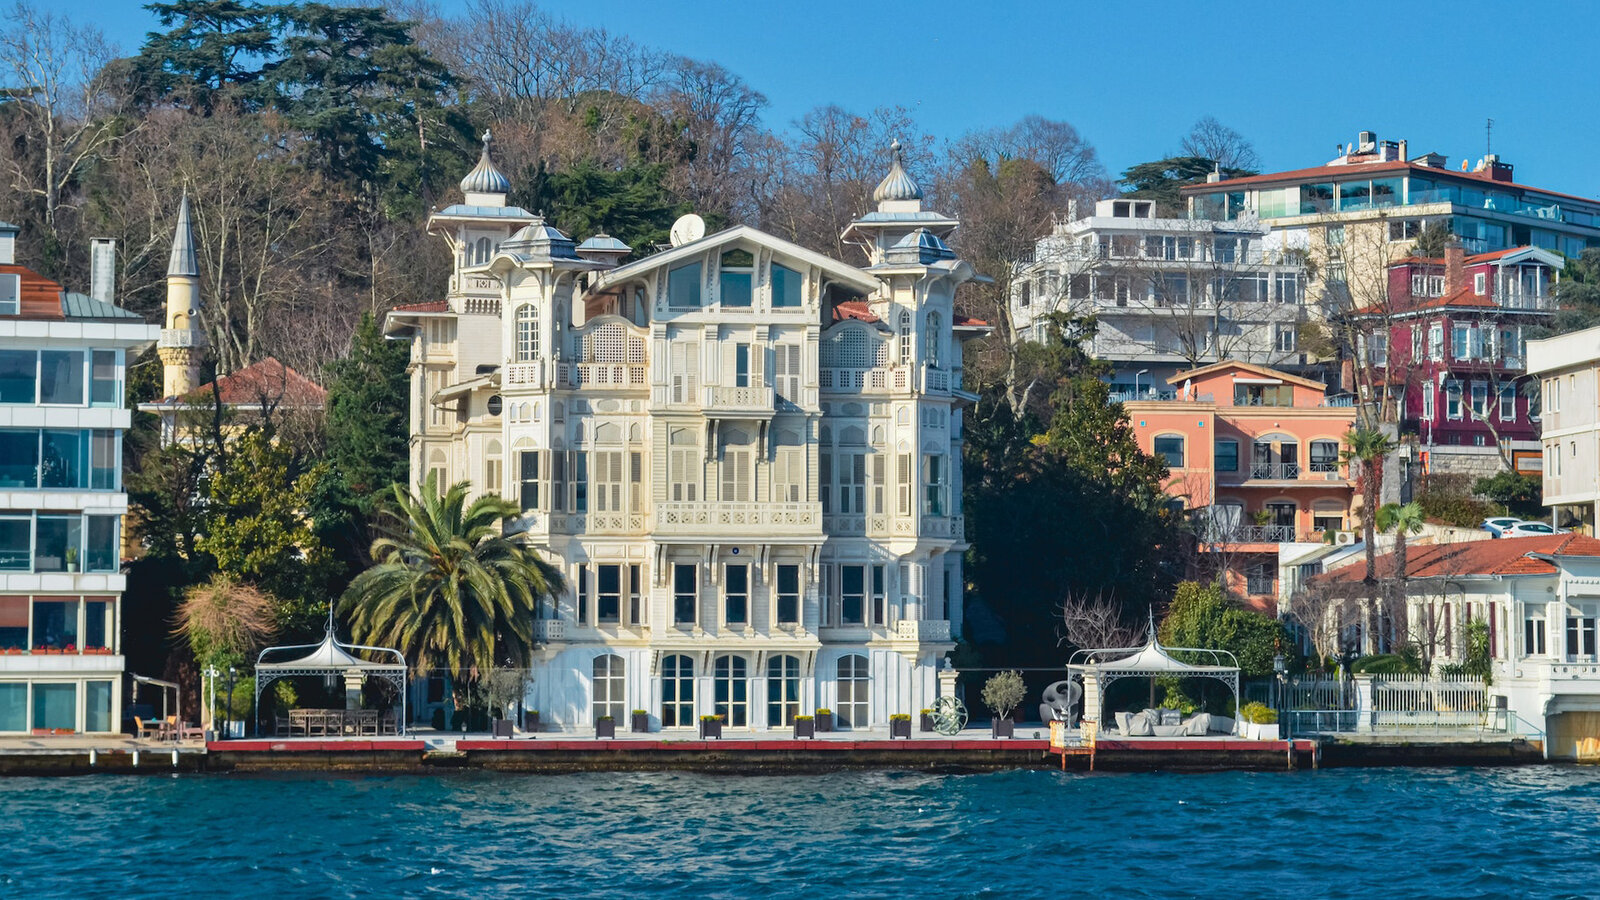 Istanbul's Most Expensive Houses: Top 5 Luxury Mansions by the Bosporus